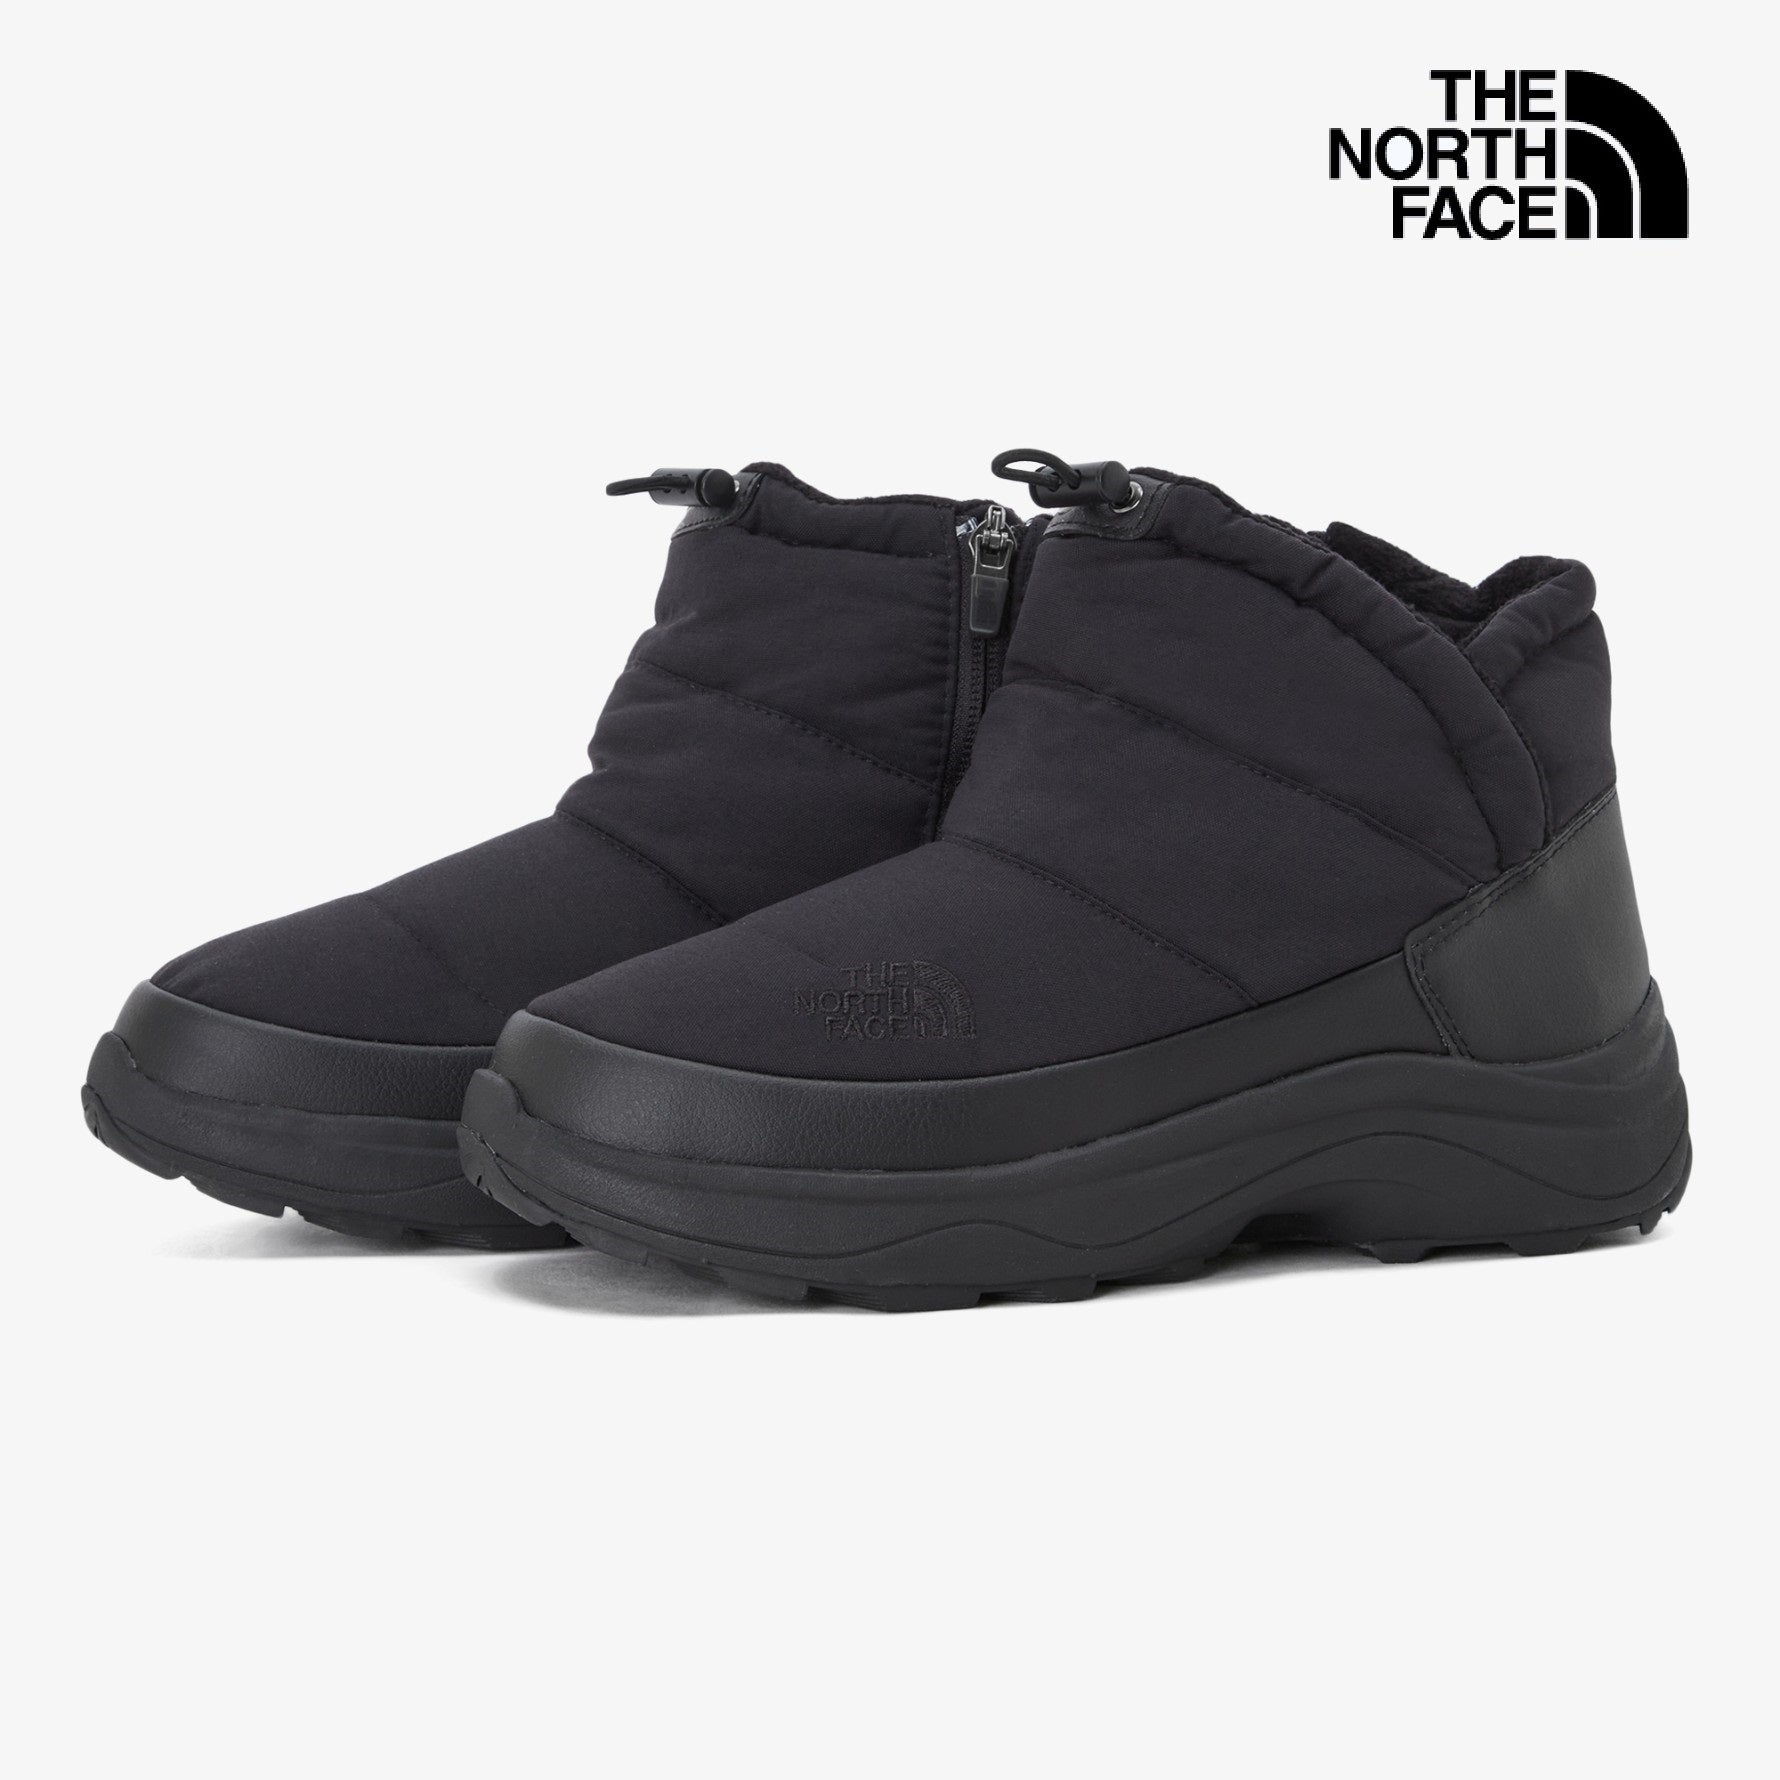 THE NORTH FACE] BOOTIE SHORT _ REAL_BLACK (NS99P54K) 23~29 ECO T